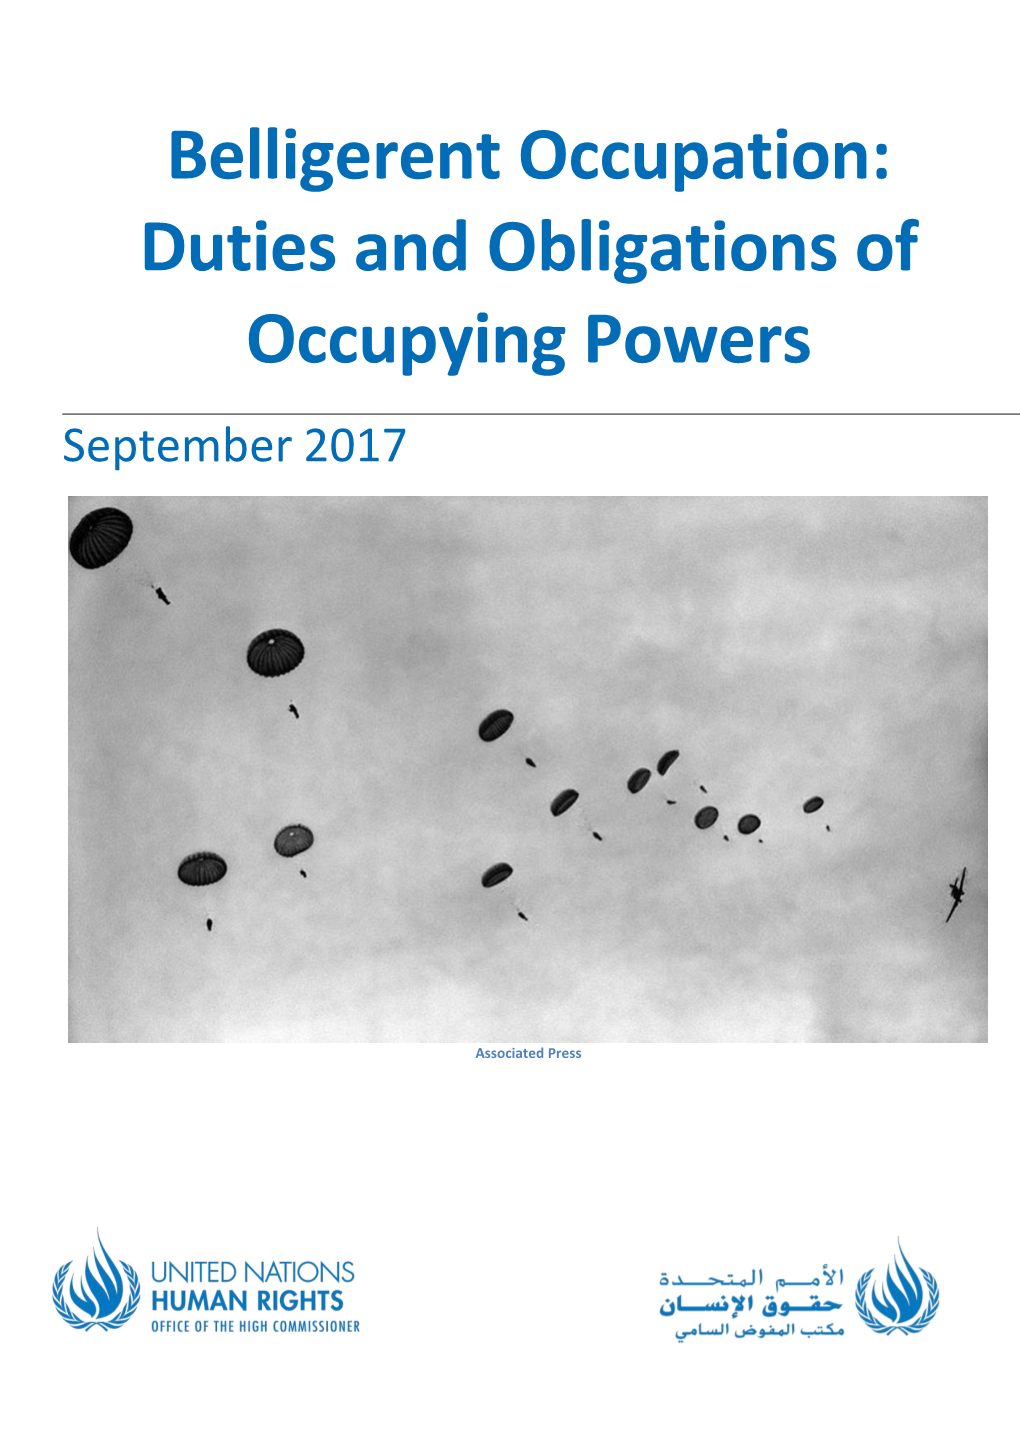 Belligerent Occupation: Duties and Obligations of Occupying Powers